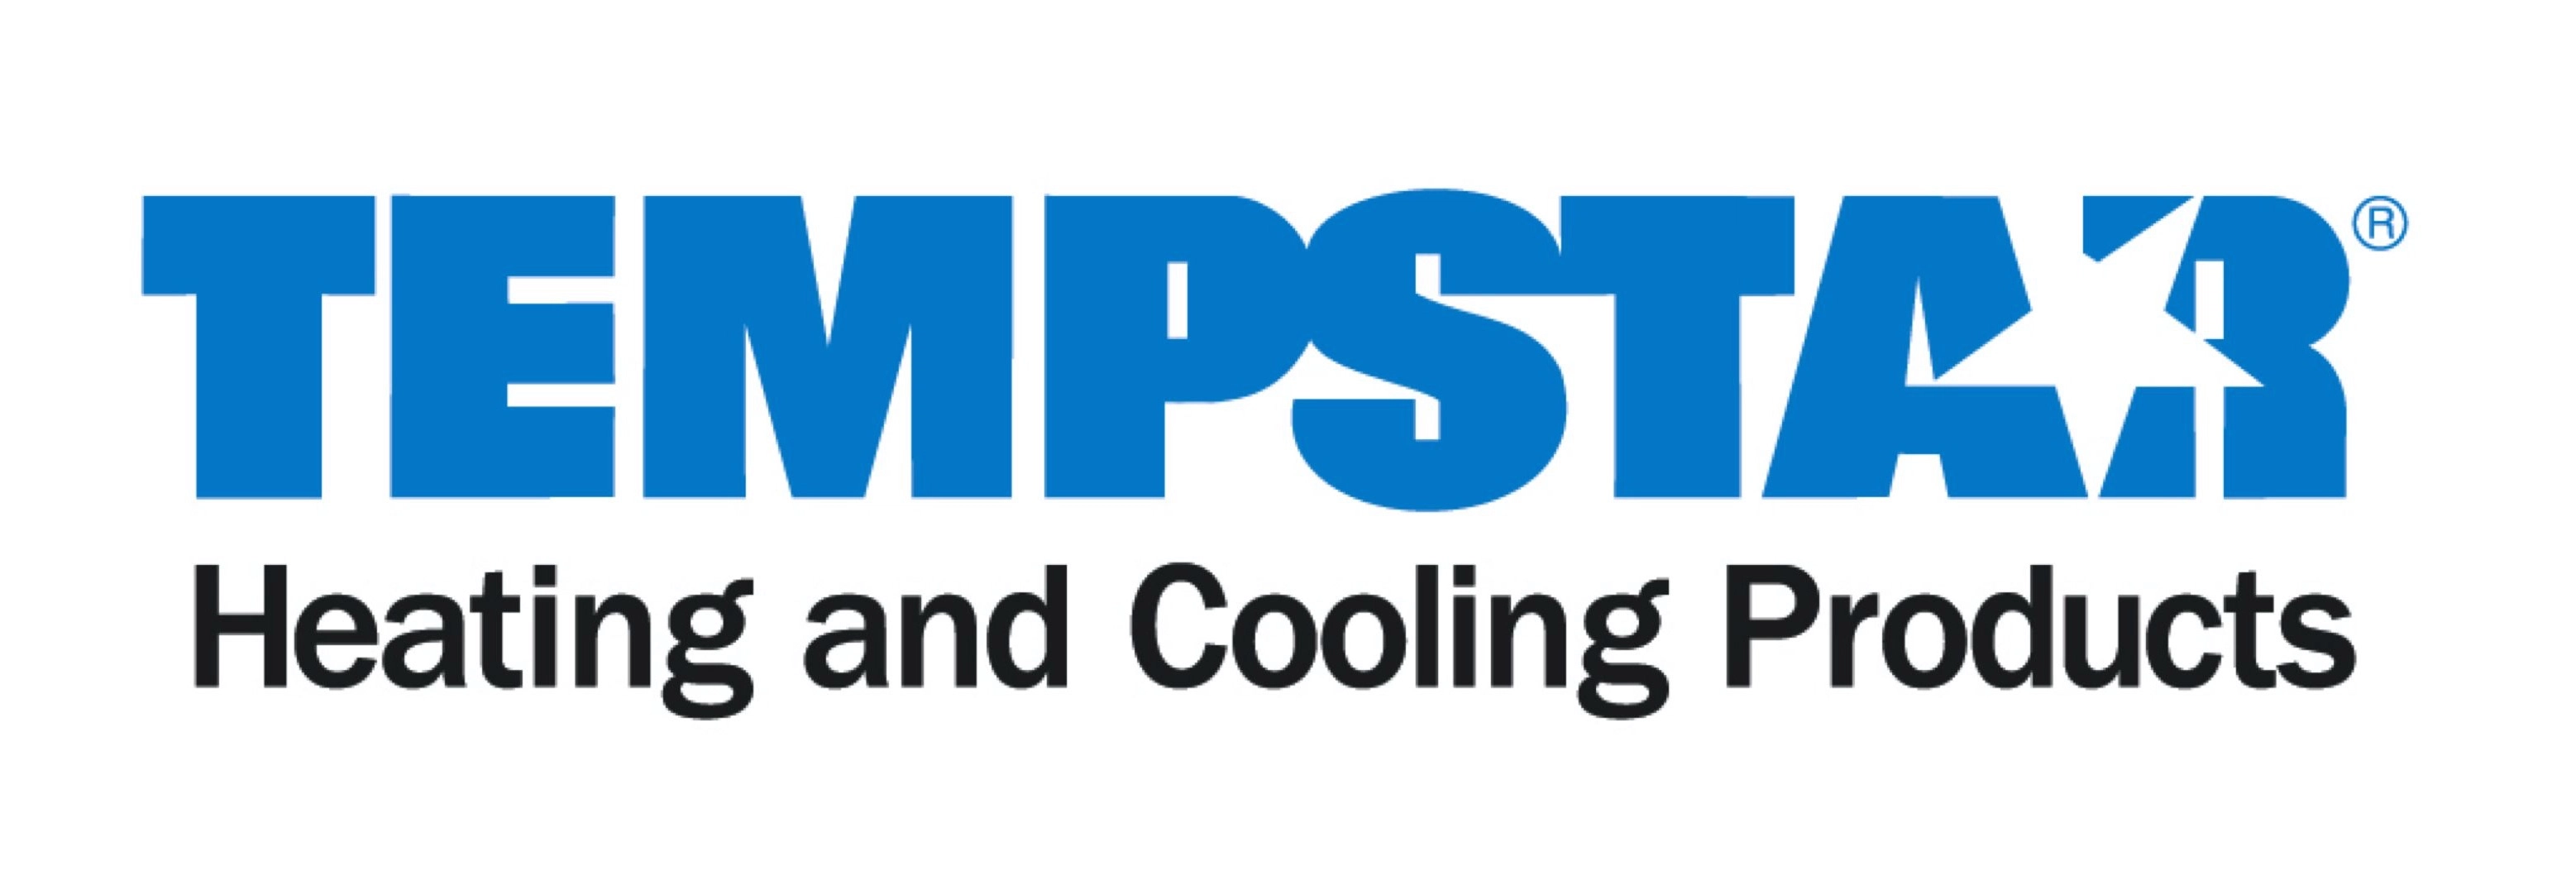 ON CALL HEATING & AIR CONDITIONING SERVICES Logo